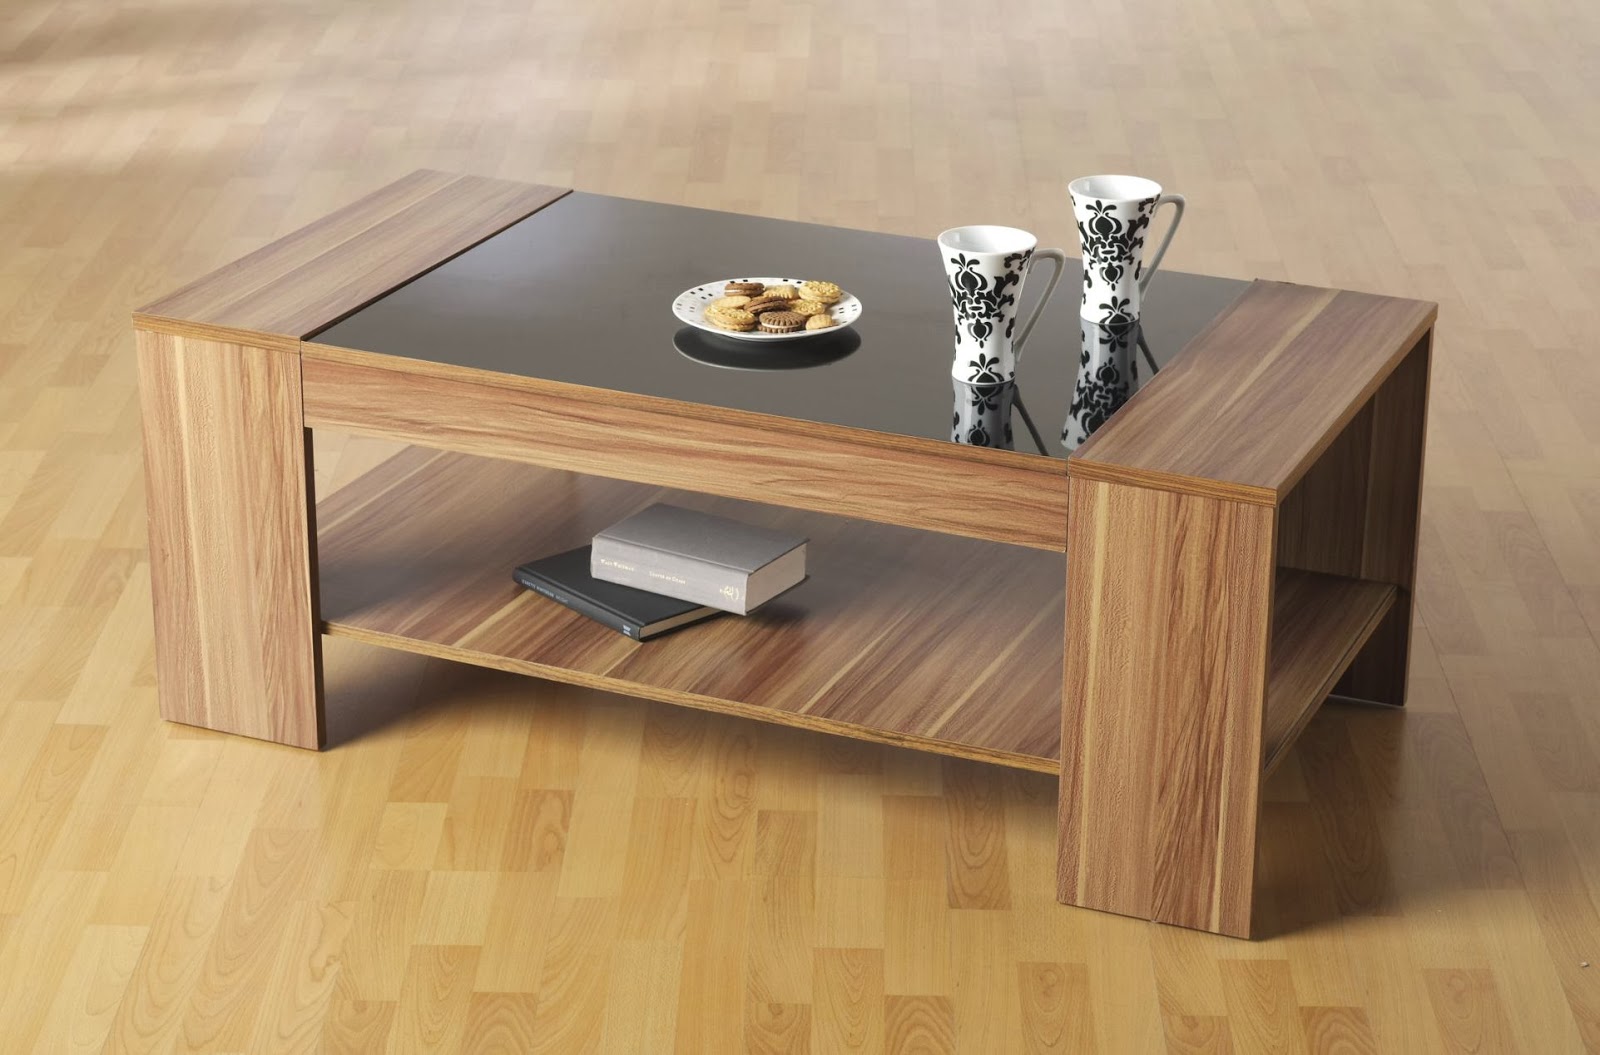 New Contemporary Coffee Tables Designs 2014 Ideas | Furniture ...